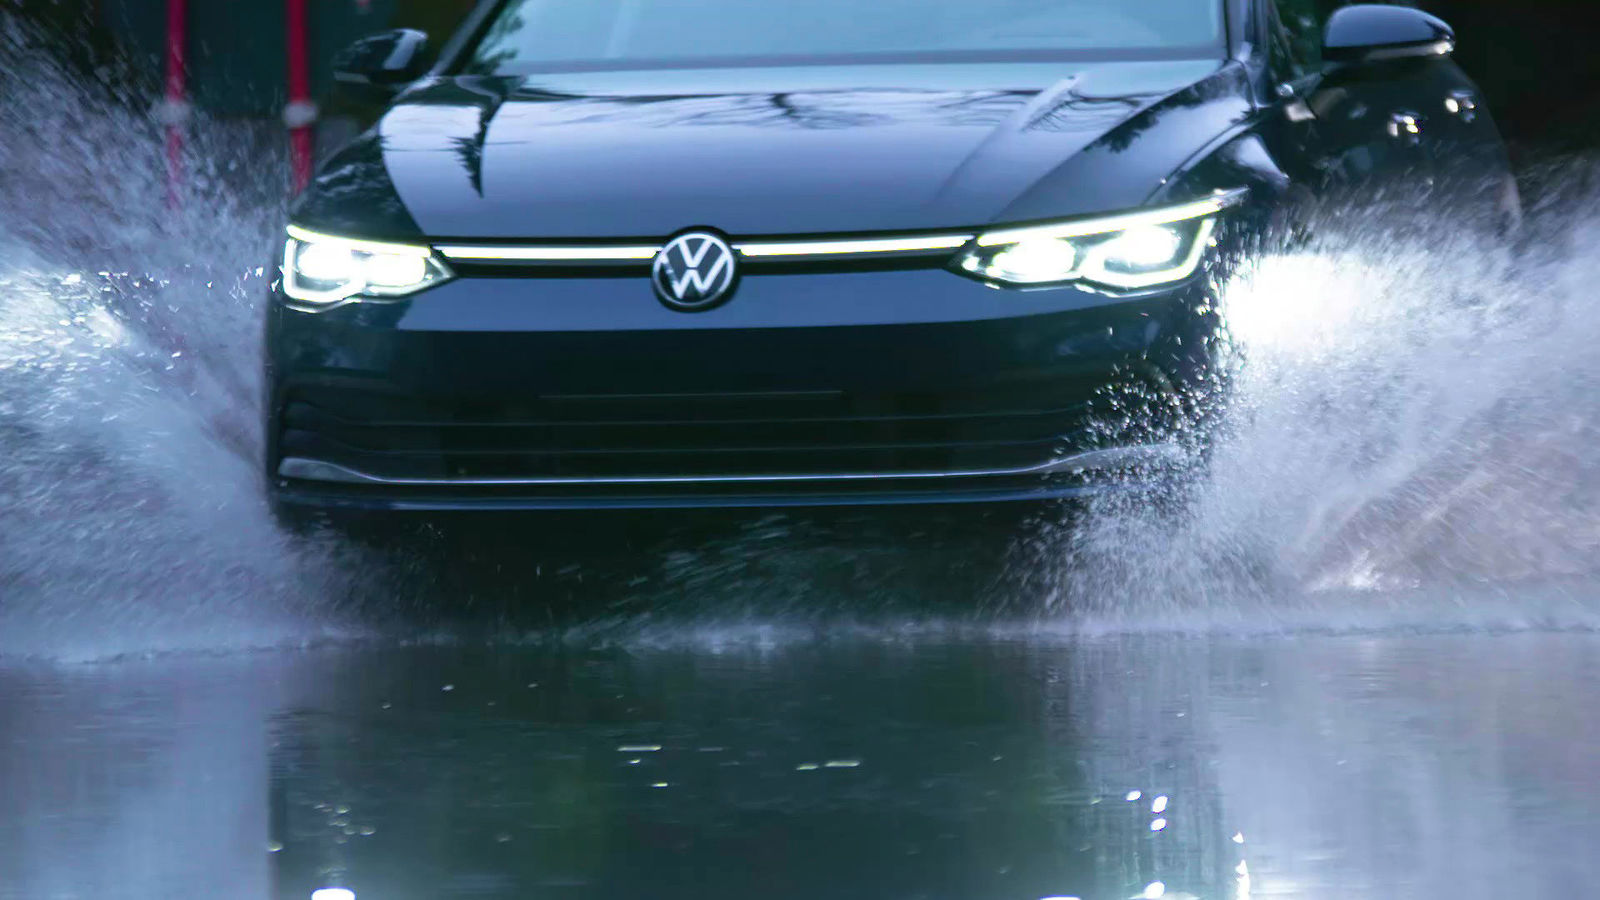 Does it work? VW's Predictive Cruise tested